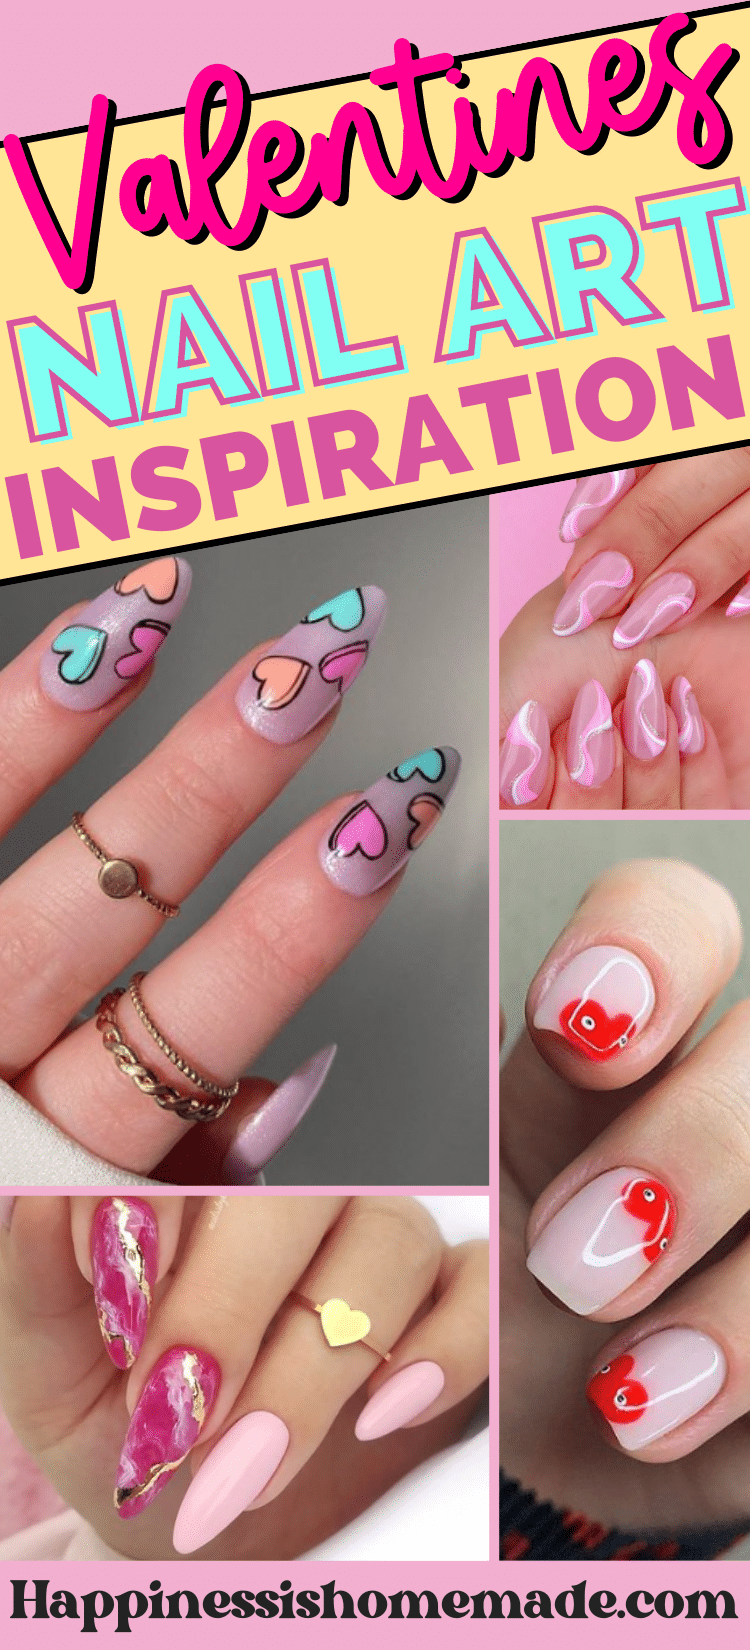 20 Winter Nail Art Ideas to Try At Home or the Salon